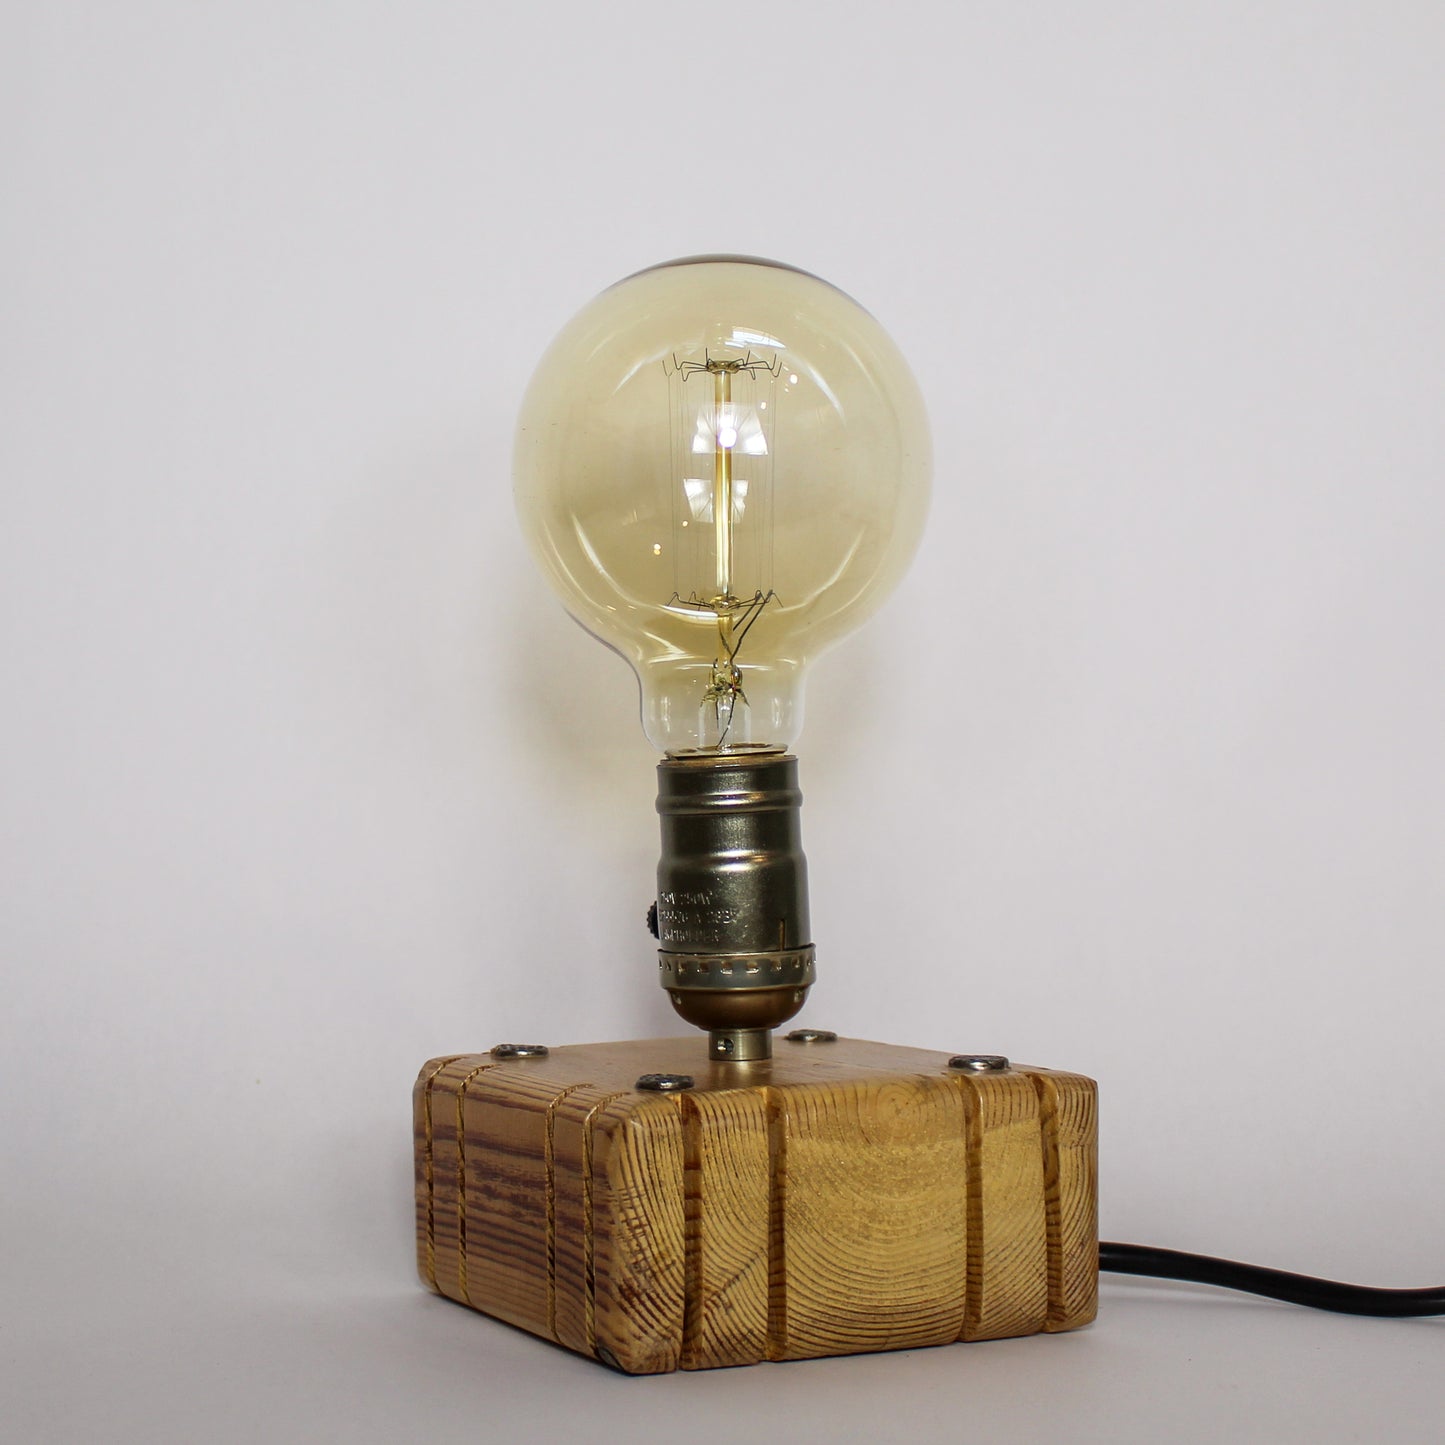 Wooden Square Office Lamp